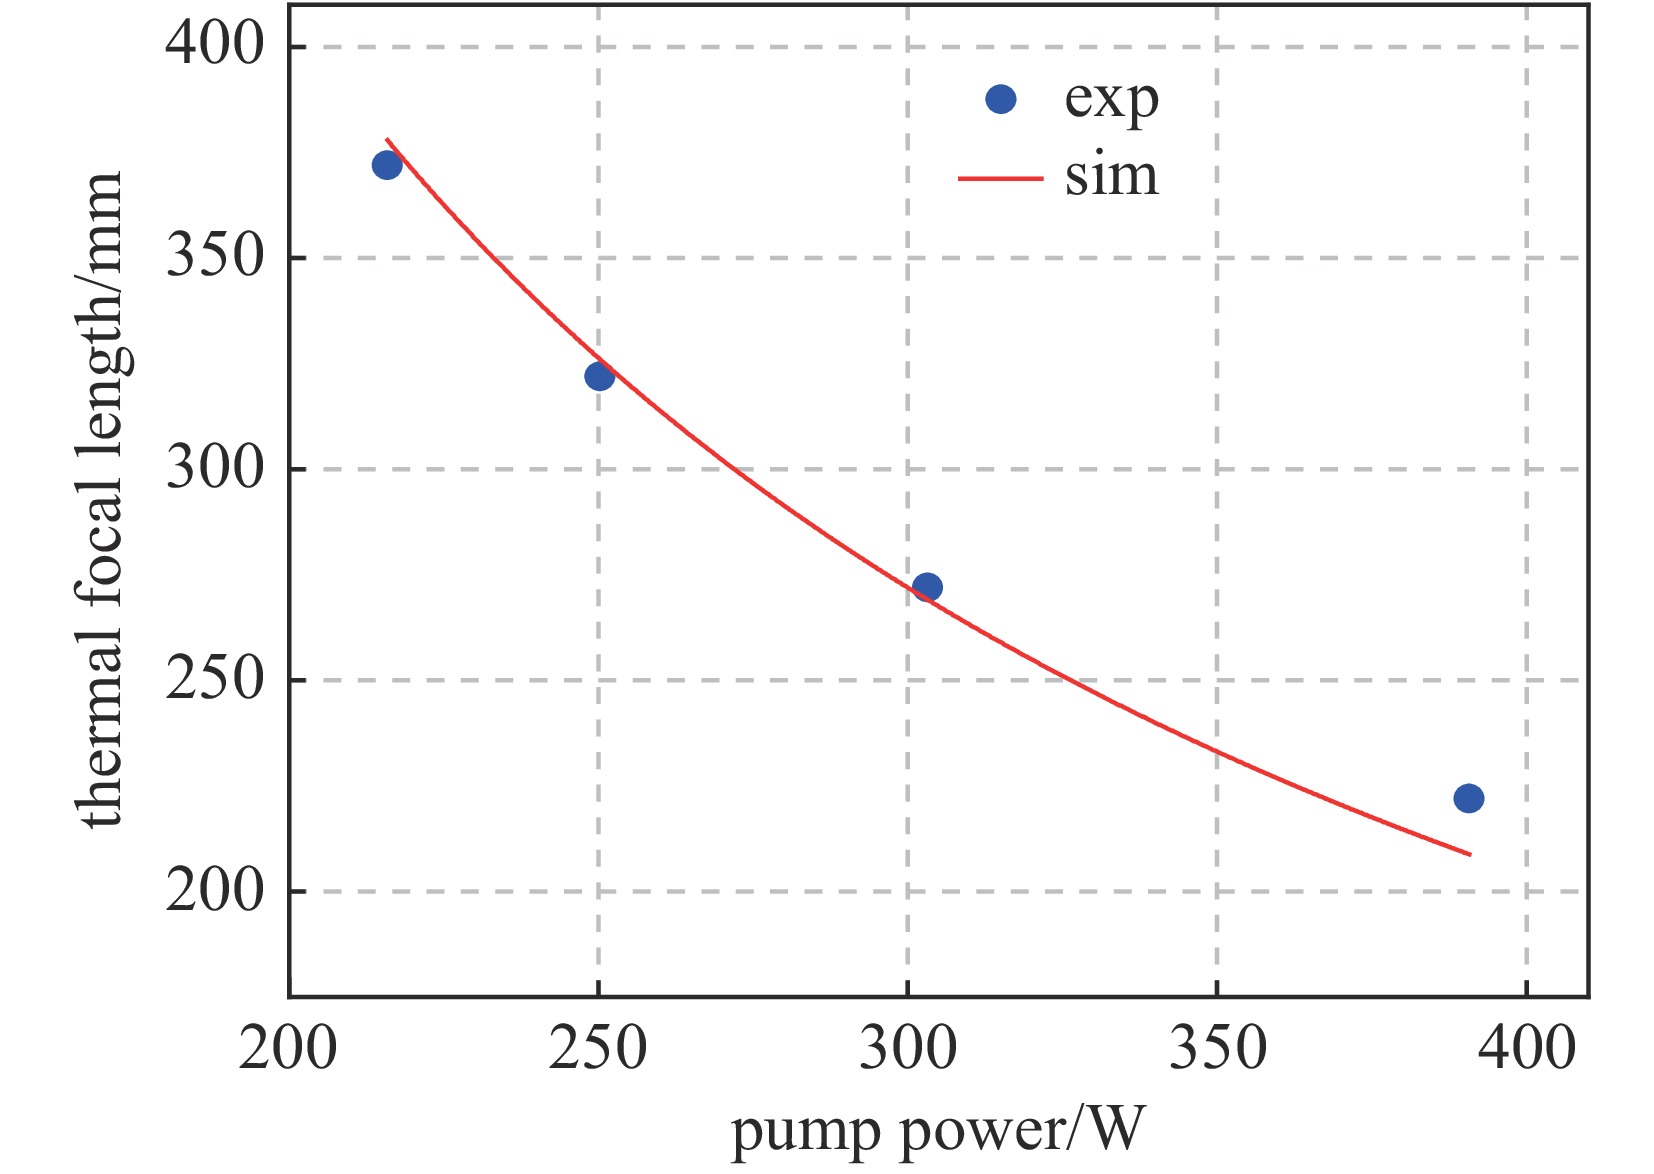 Thermal lens focal length versus the pump power for a single LD side-pumped Nd:YAG module